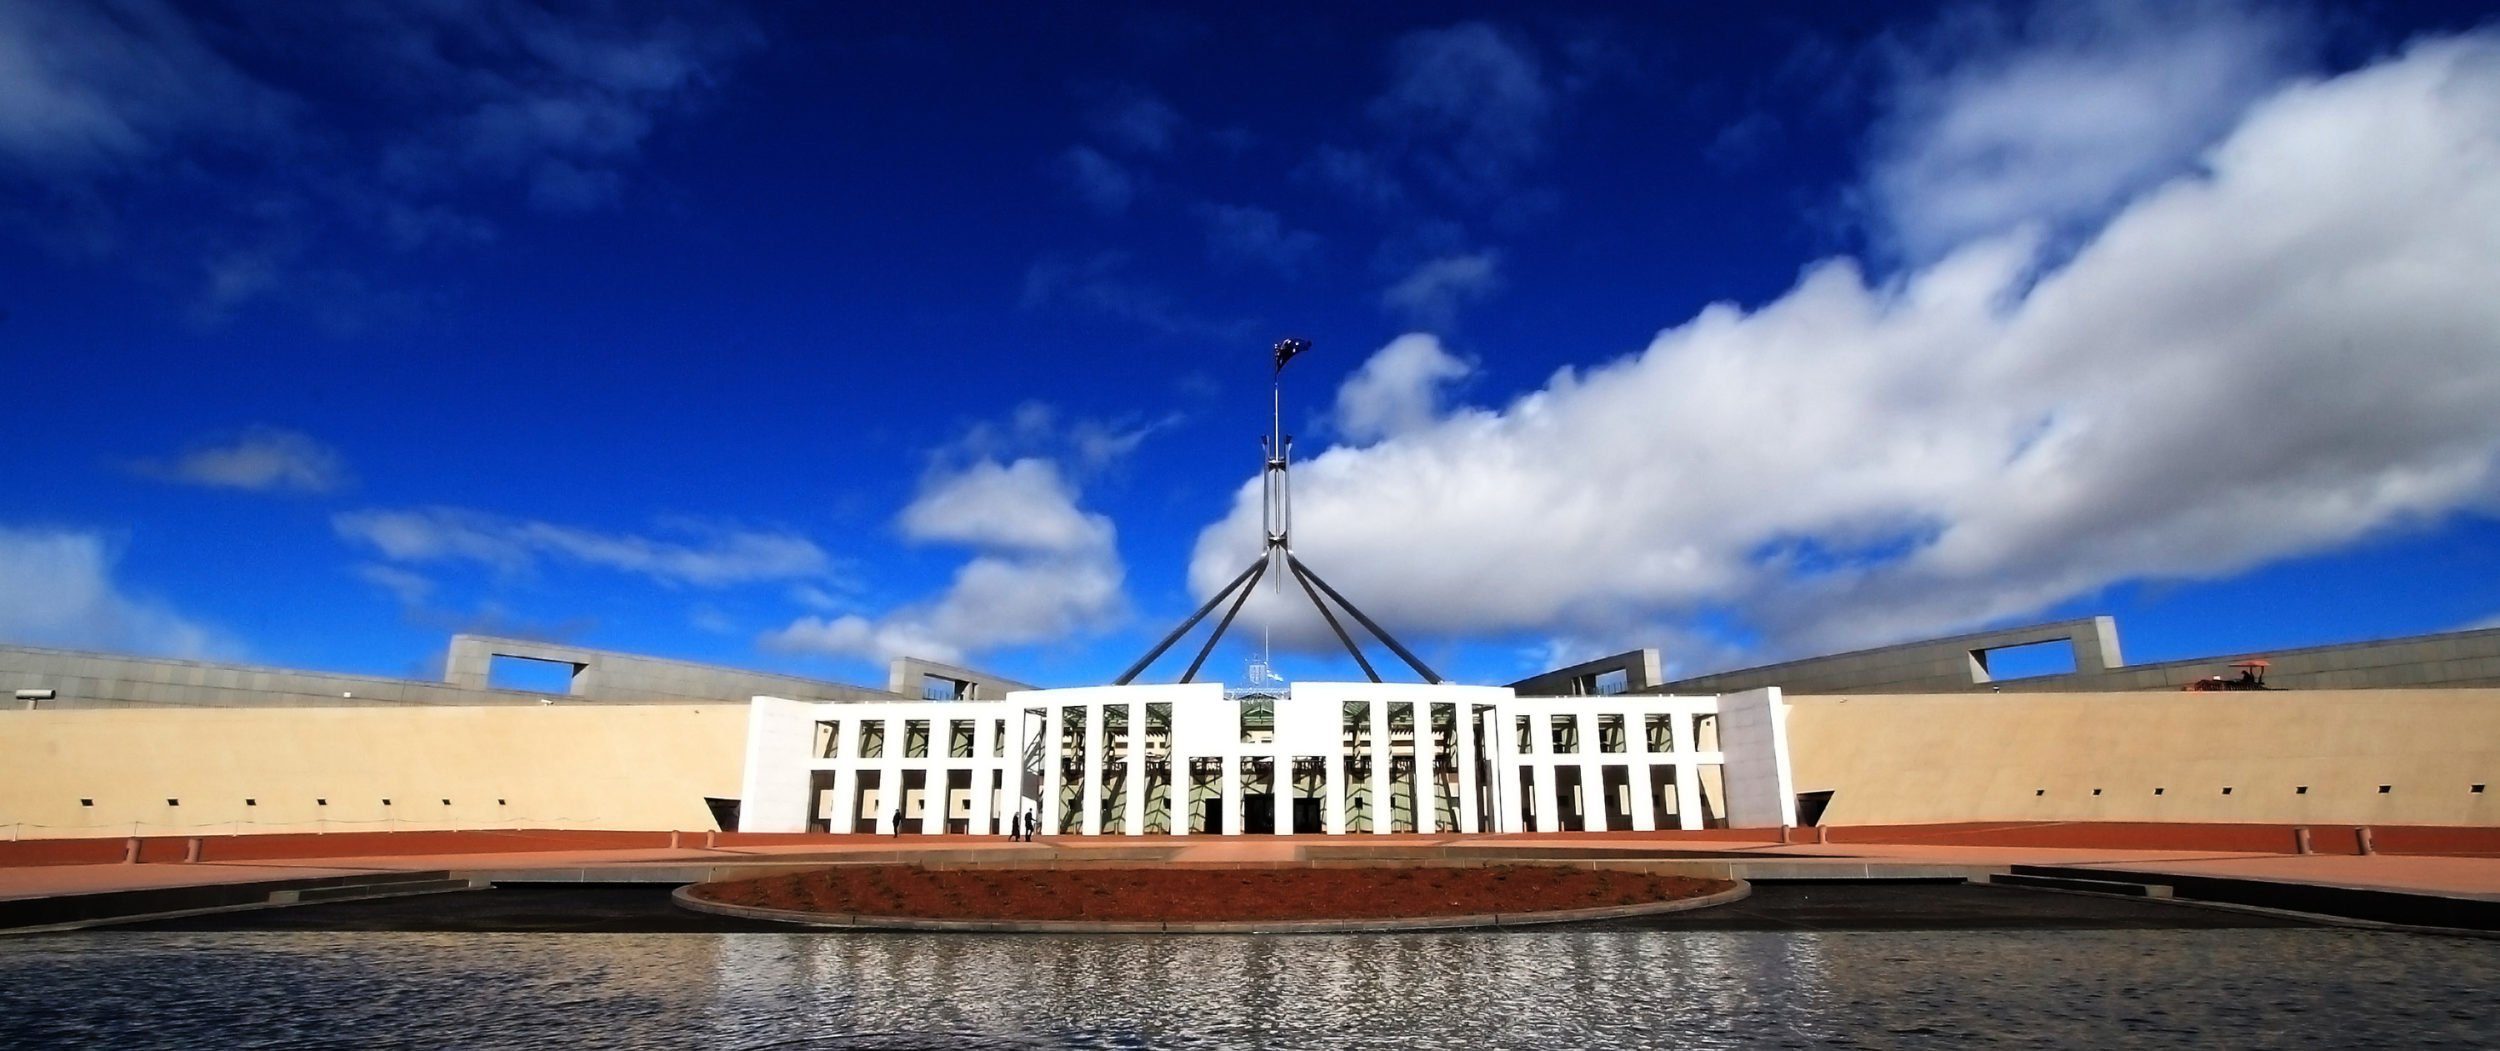 Parliment House in Canberra, Australia